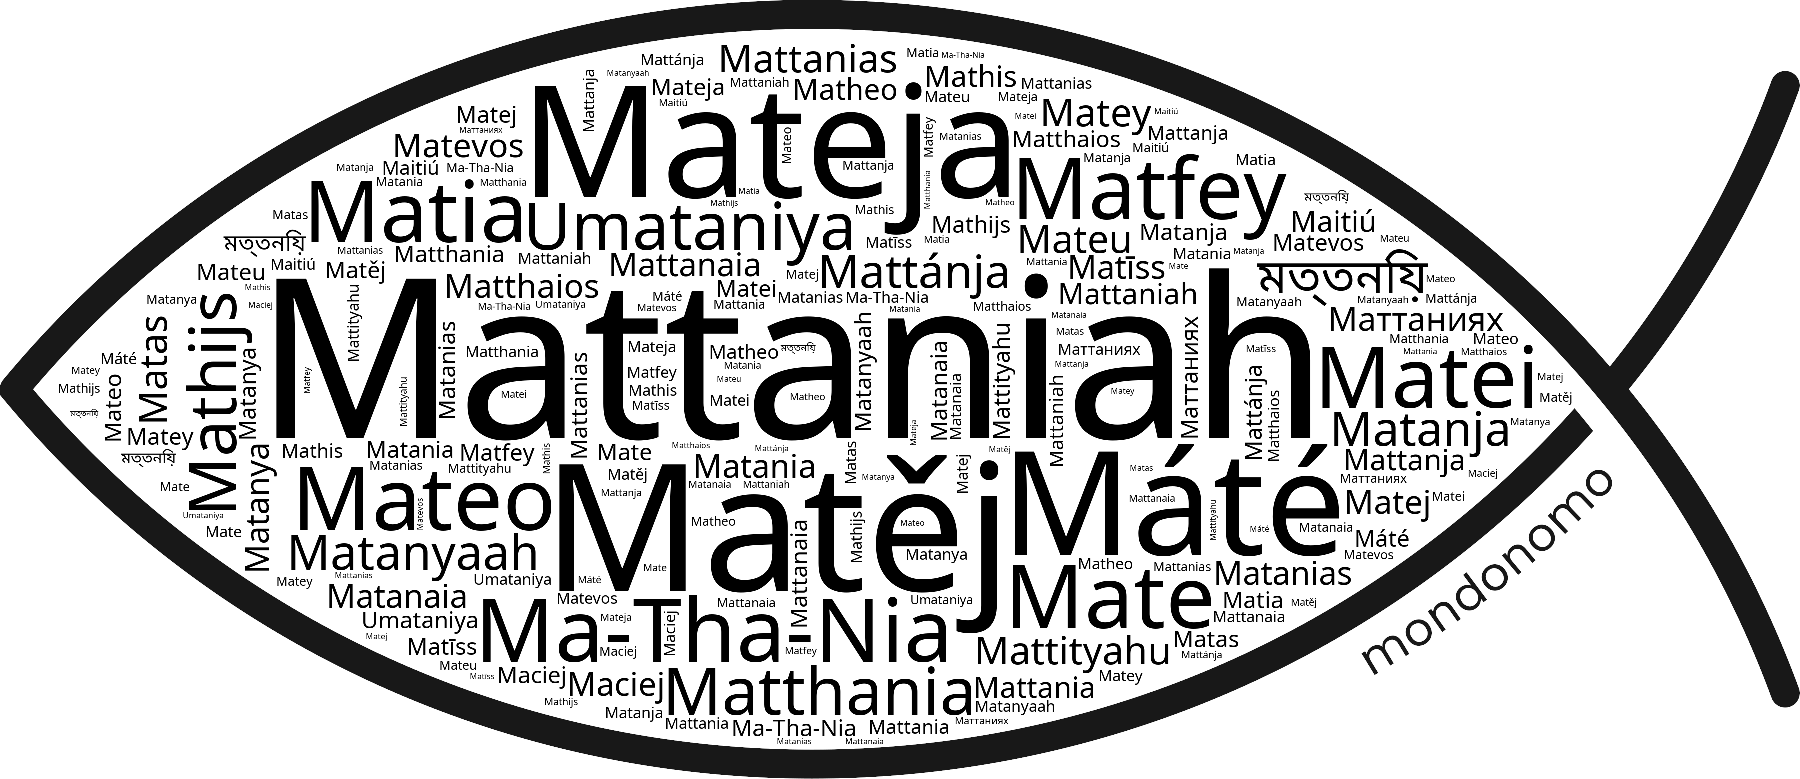 Name Mattaniah in the world's Bibles